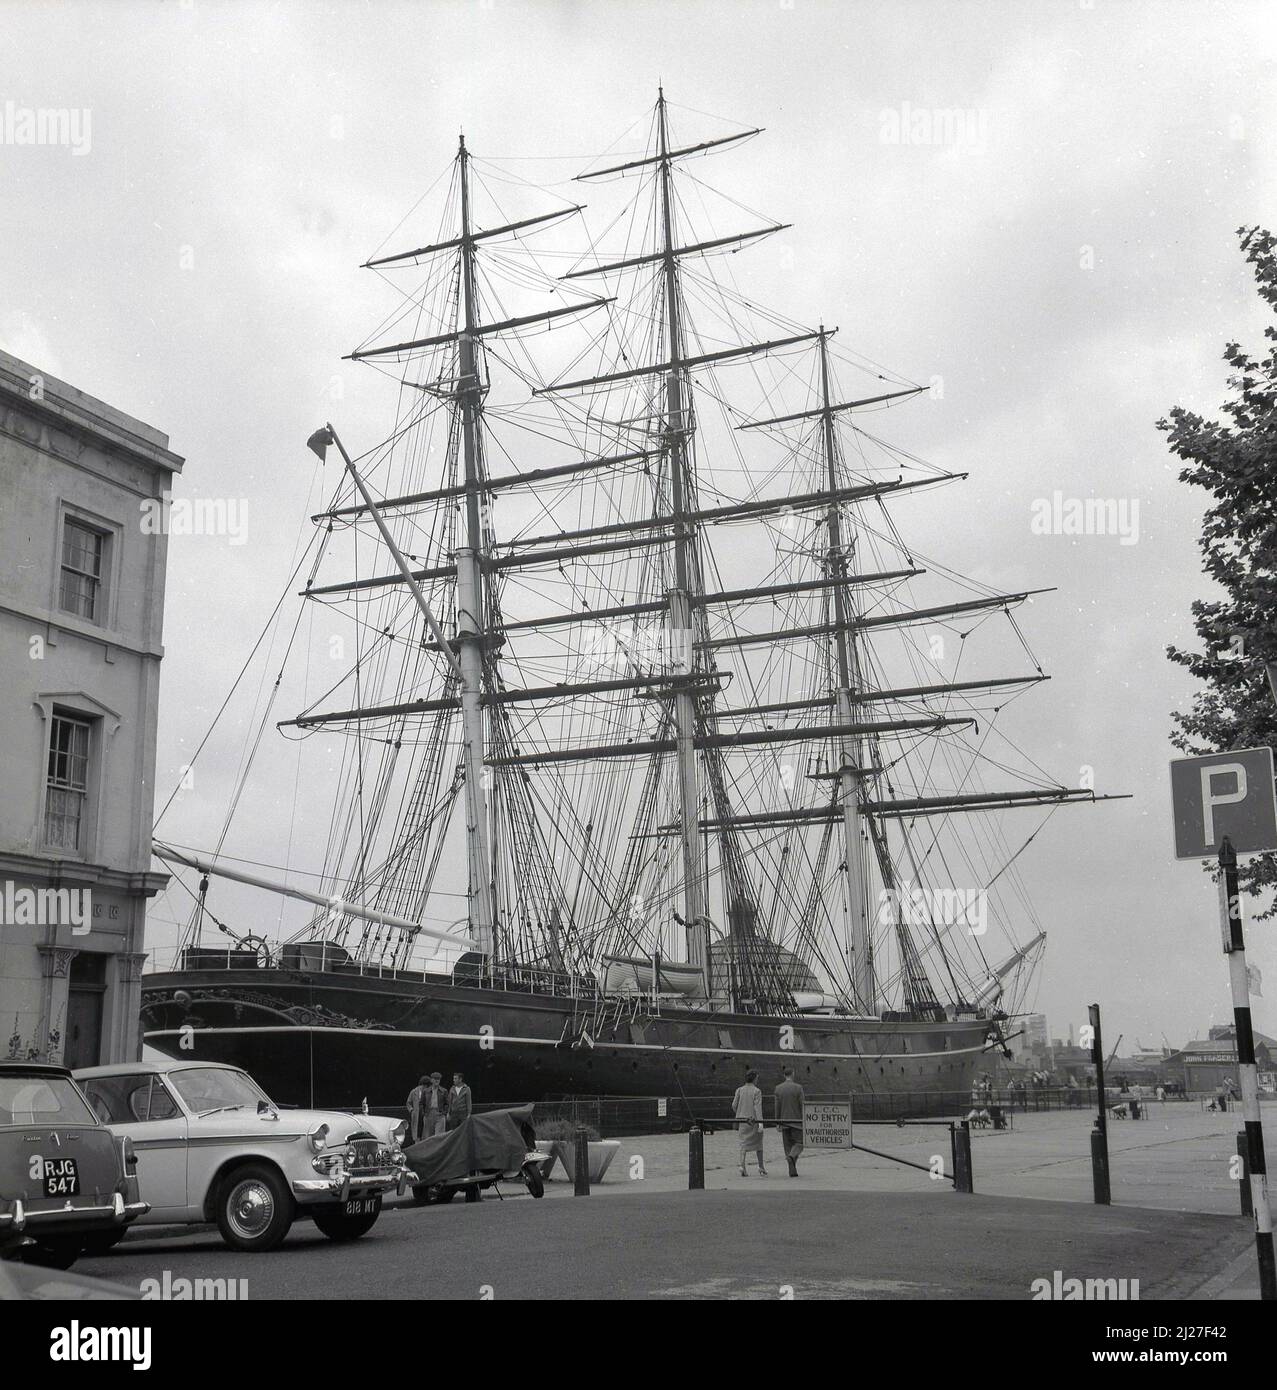 1950s, historical, the Cutty Sark moored at Greenwich, South-East London, England, UK. Built in Scotland in 1869 to carry tea back from China, the three-masted clipper ship was famous for its record-breaking passages. Stock Photo